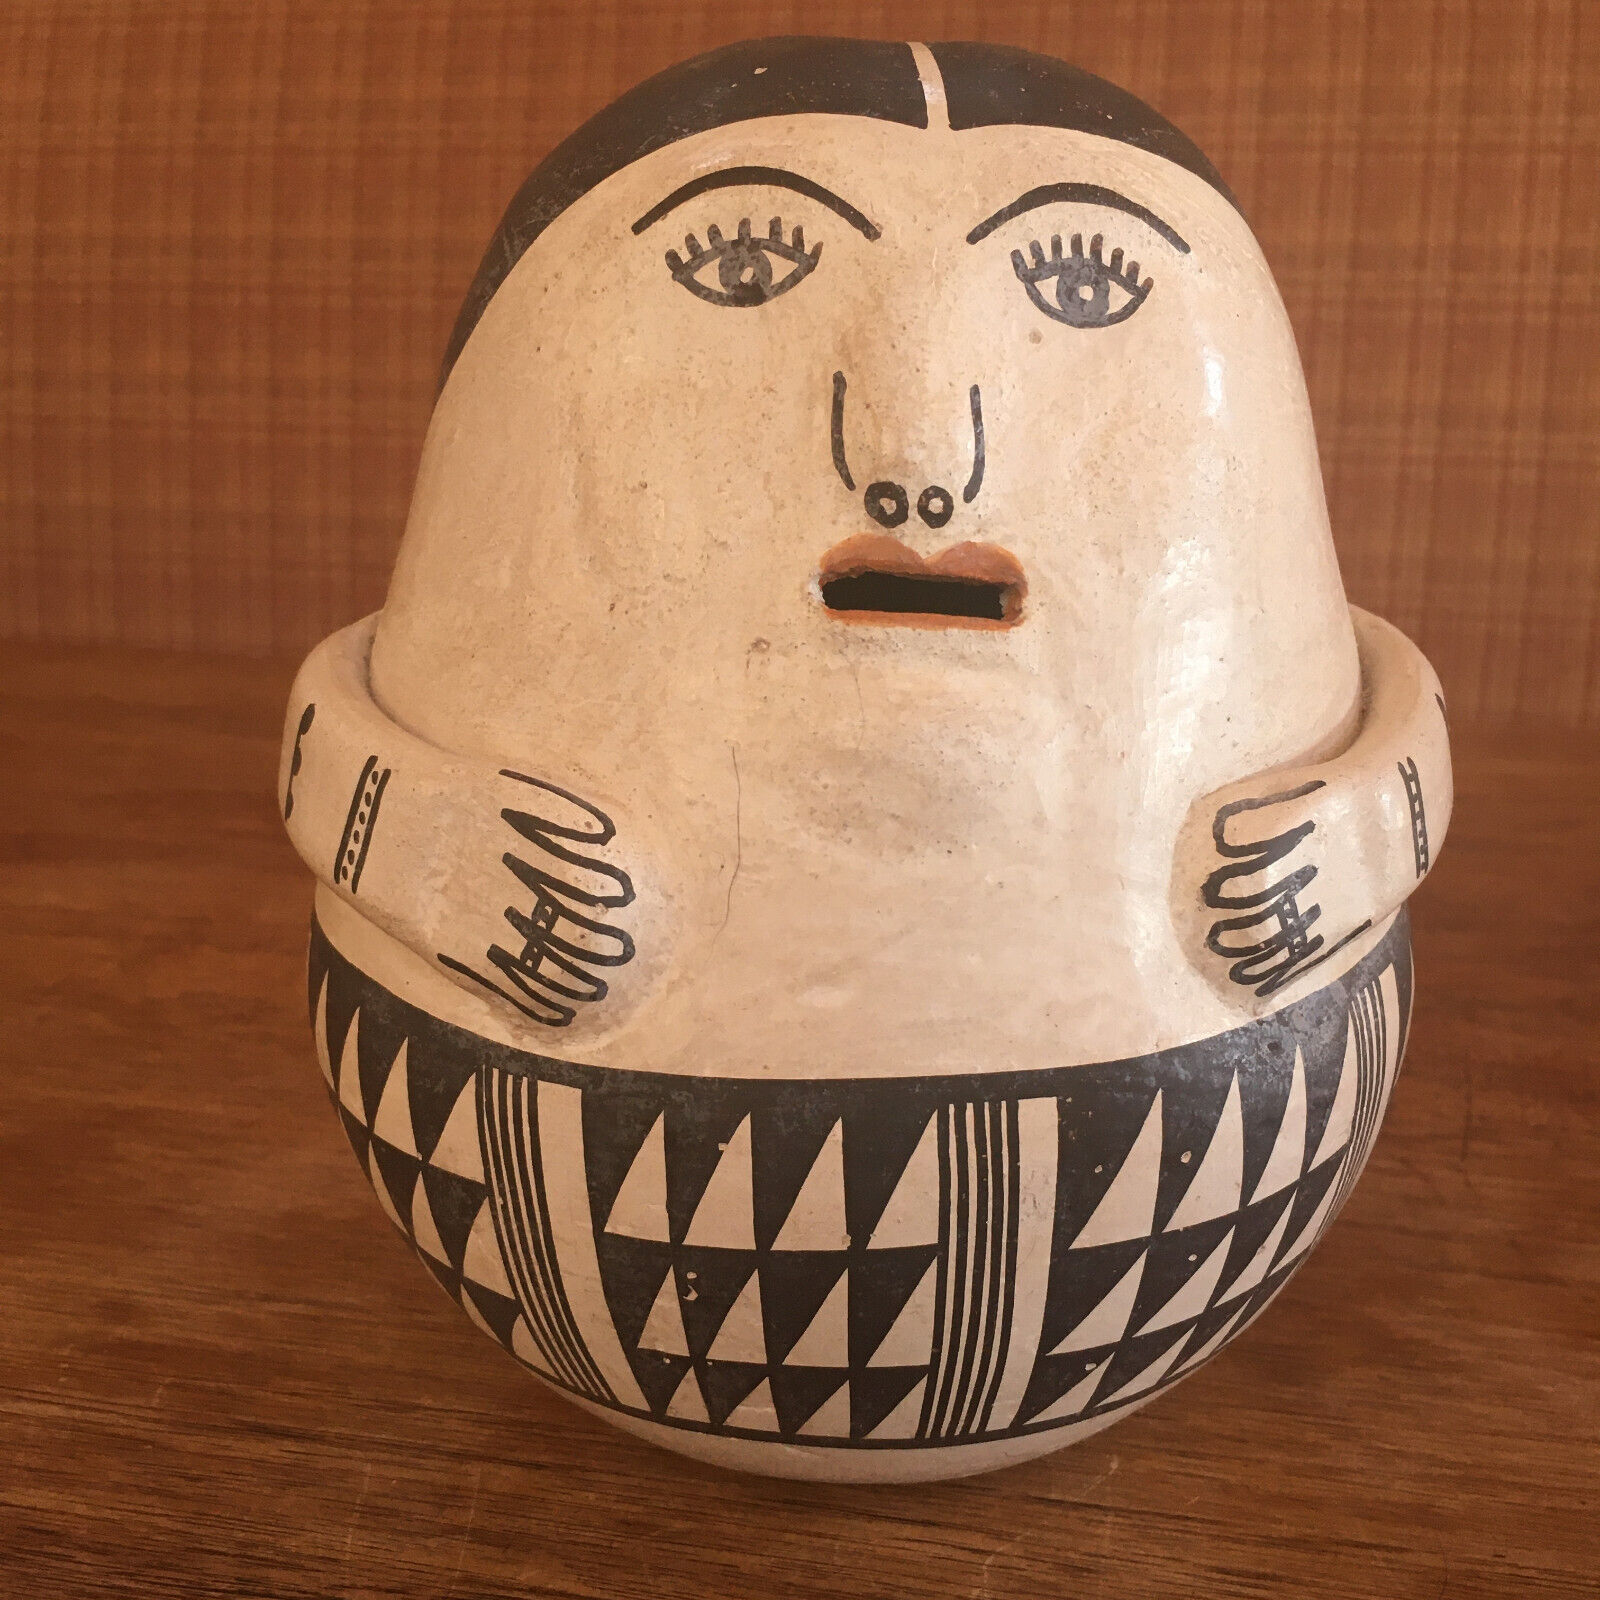 Lovely effigy by Anita Lowden of Acoma Pueblo, polychrome with superb design